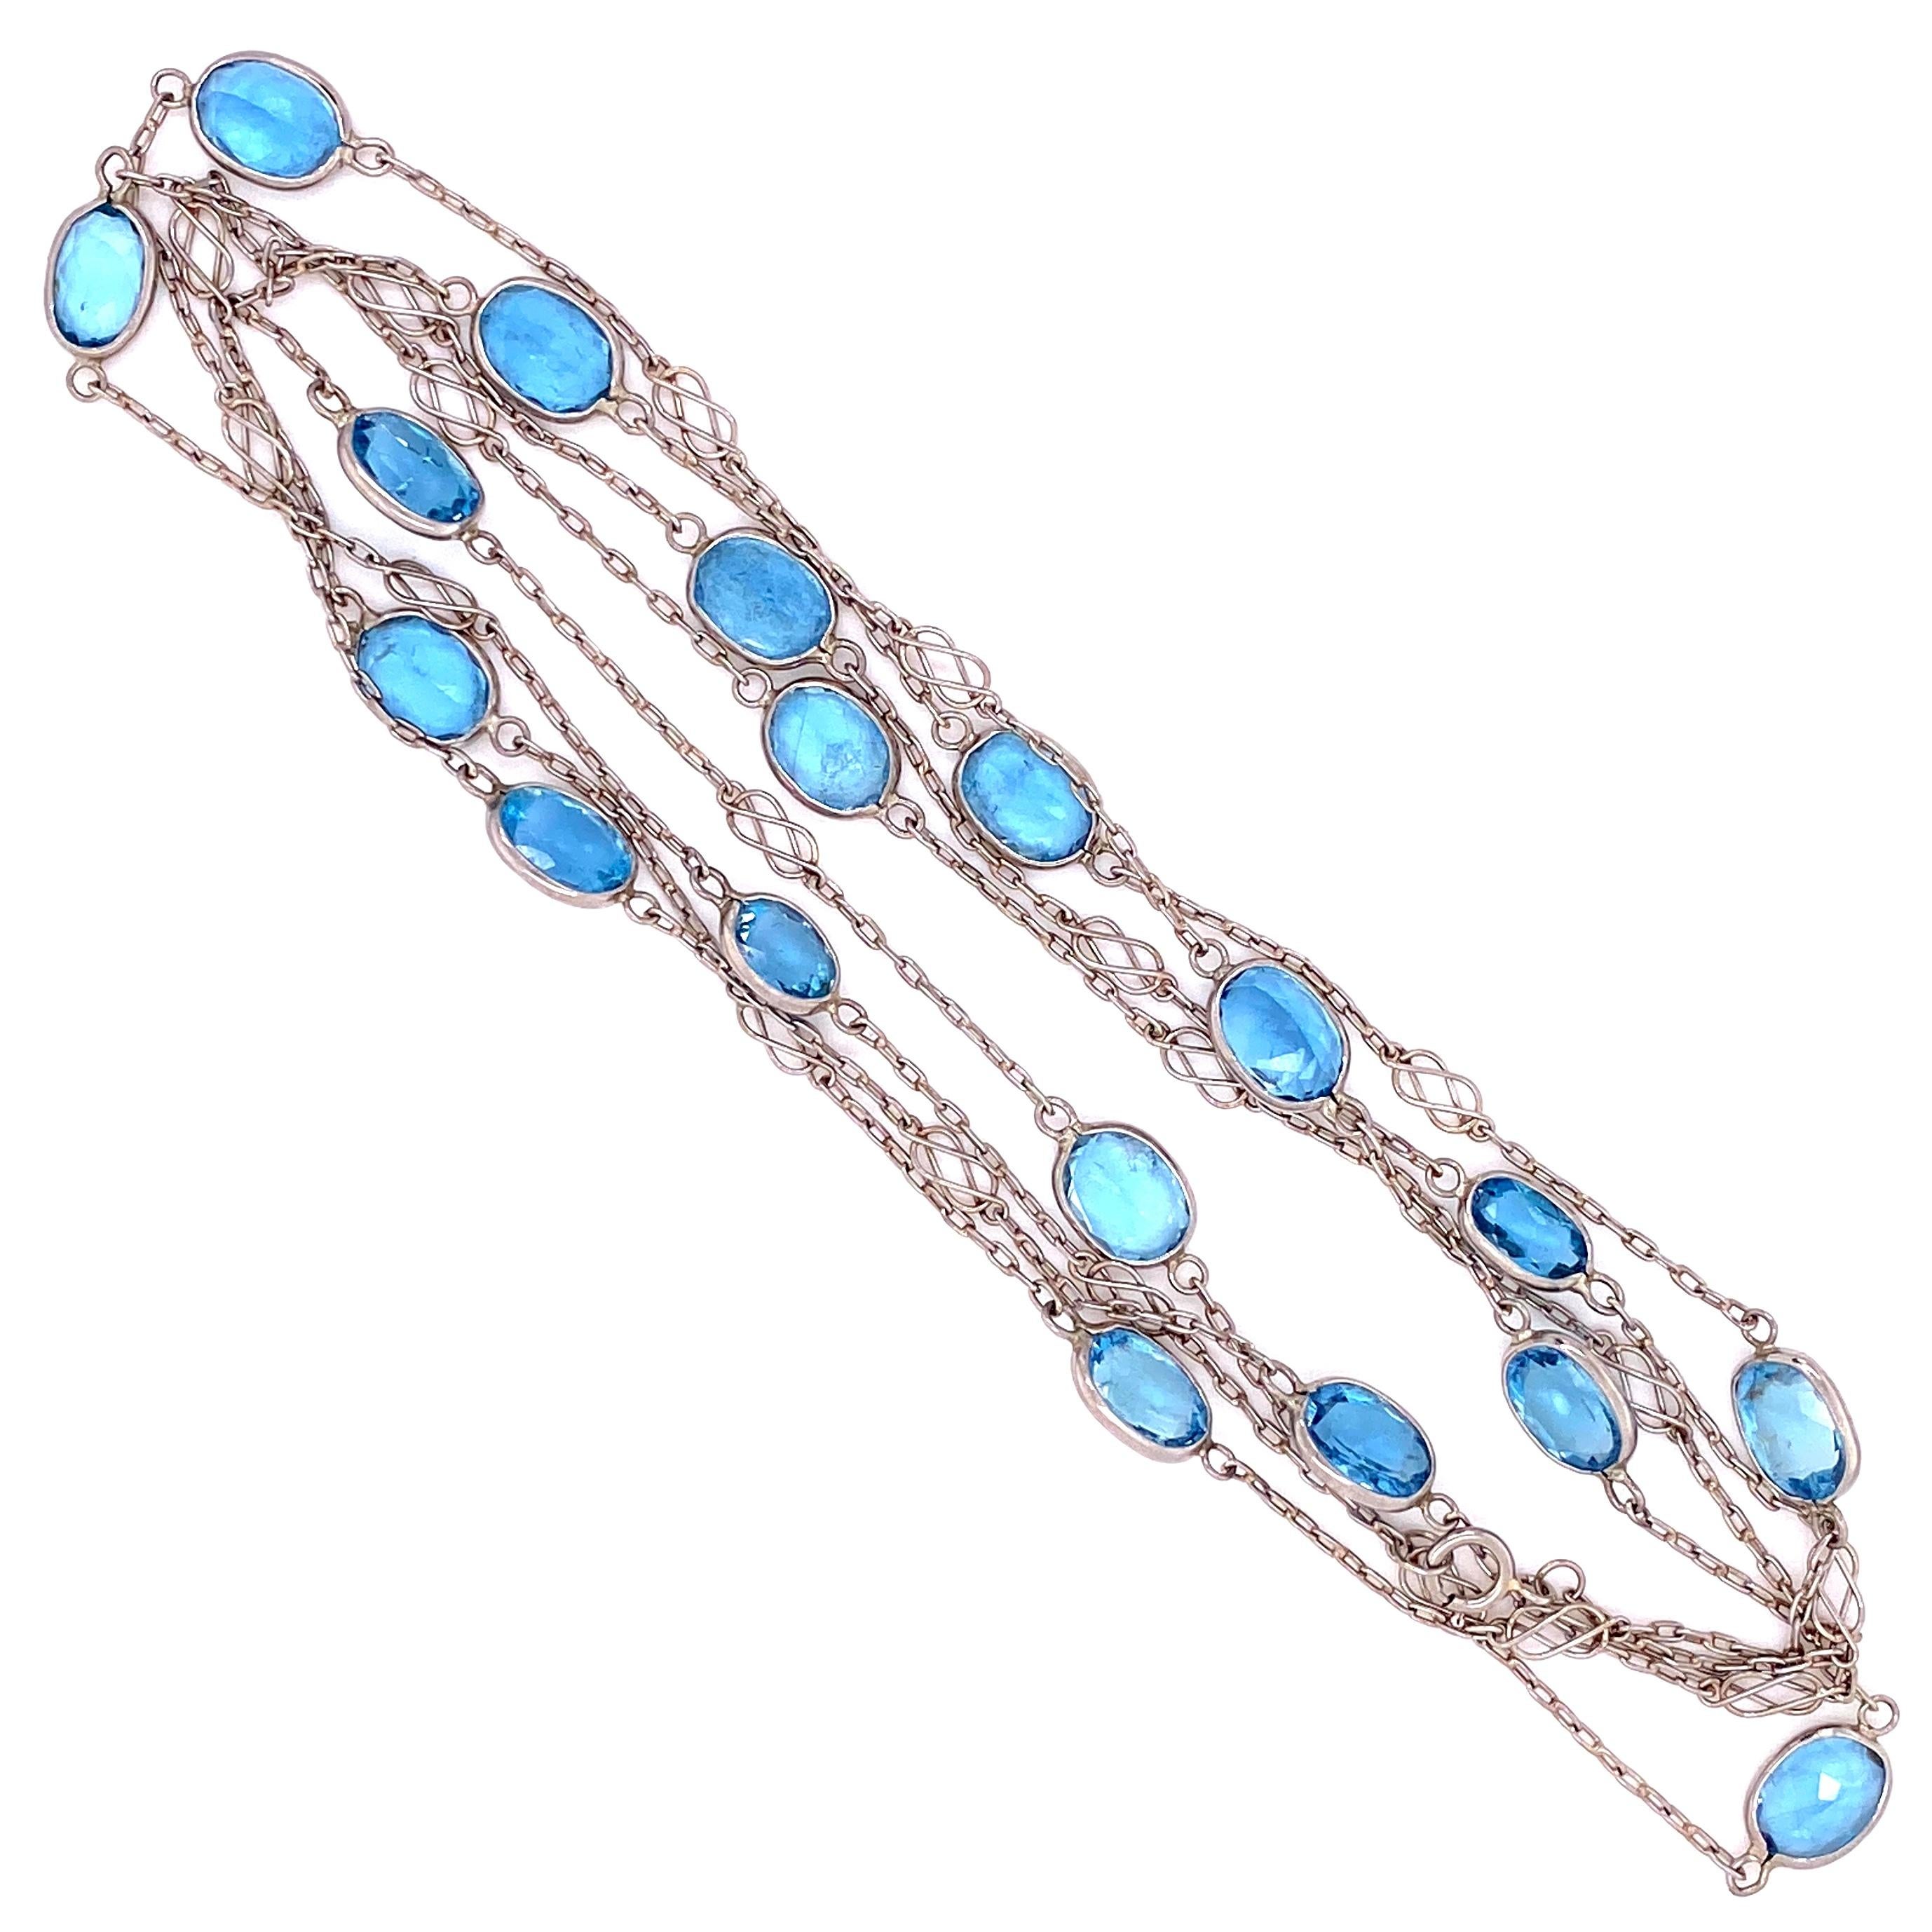 Beautiful, Elegant and finely detailed Necklace featuring oval-shaped Aquamarine Gemstones, inter-spaced with Platinum Link Chain. Approx. Length: 40 inches. The necklace is in excellent condition and was recently professionally cleaned and